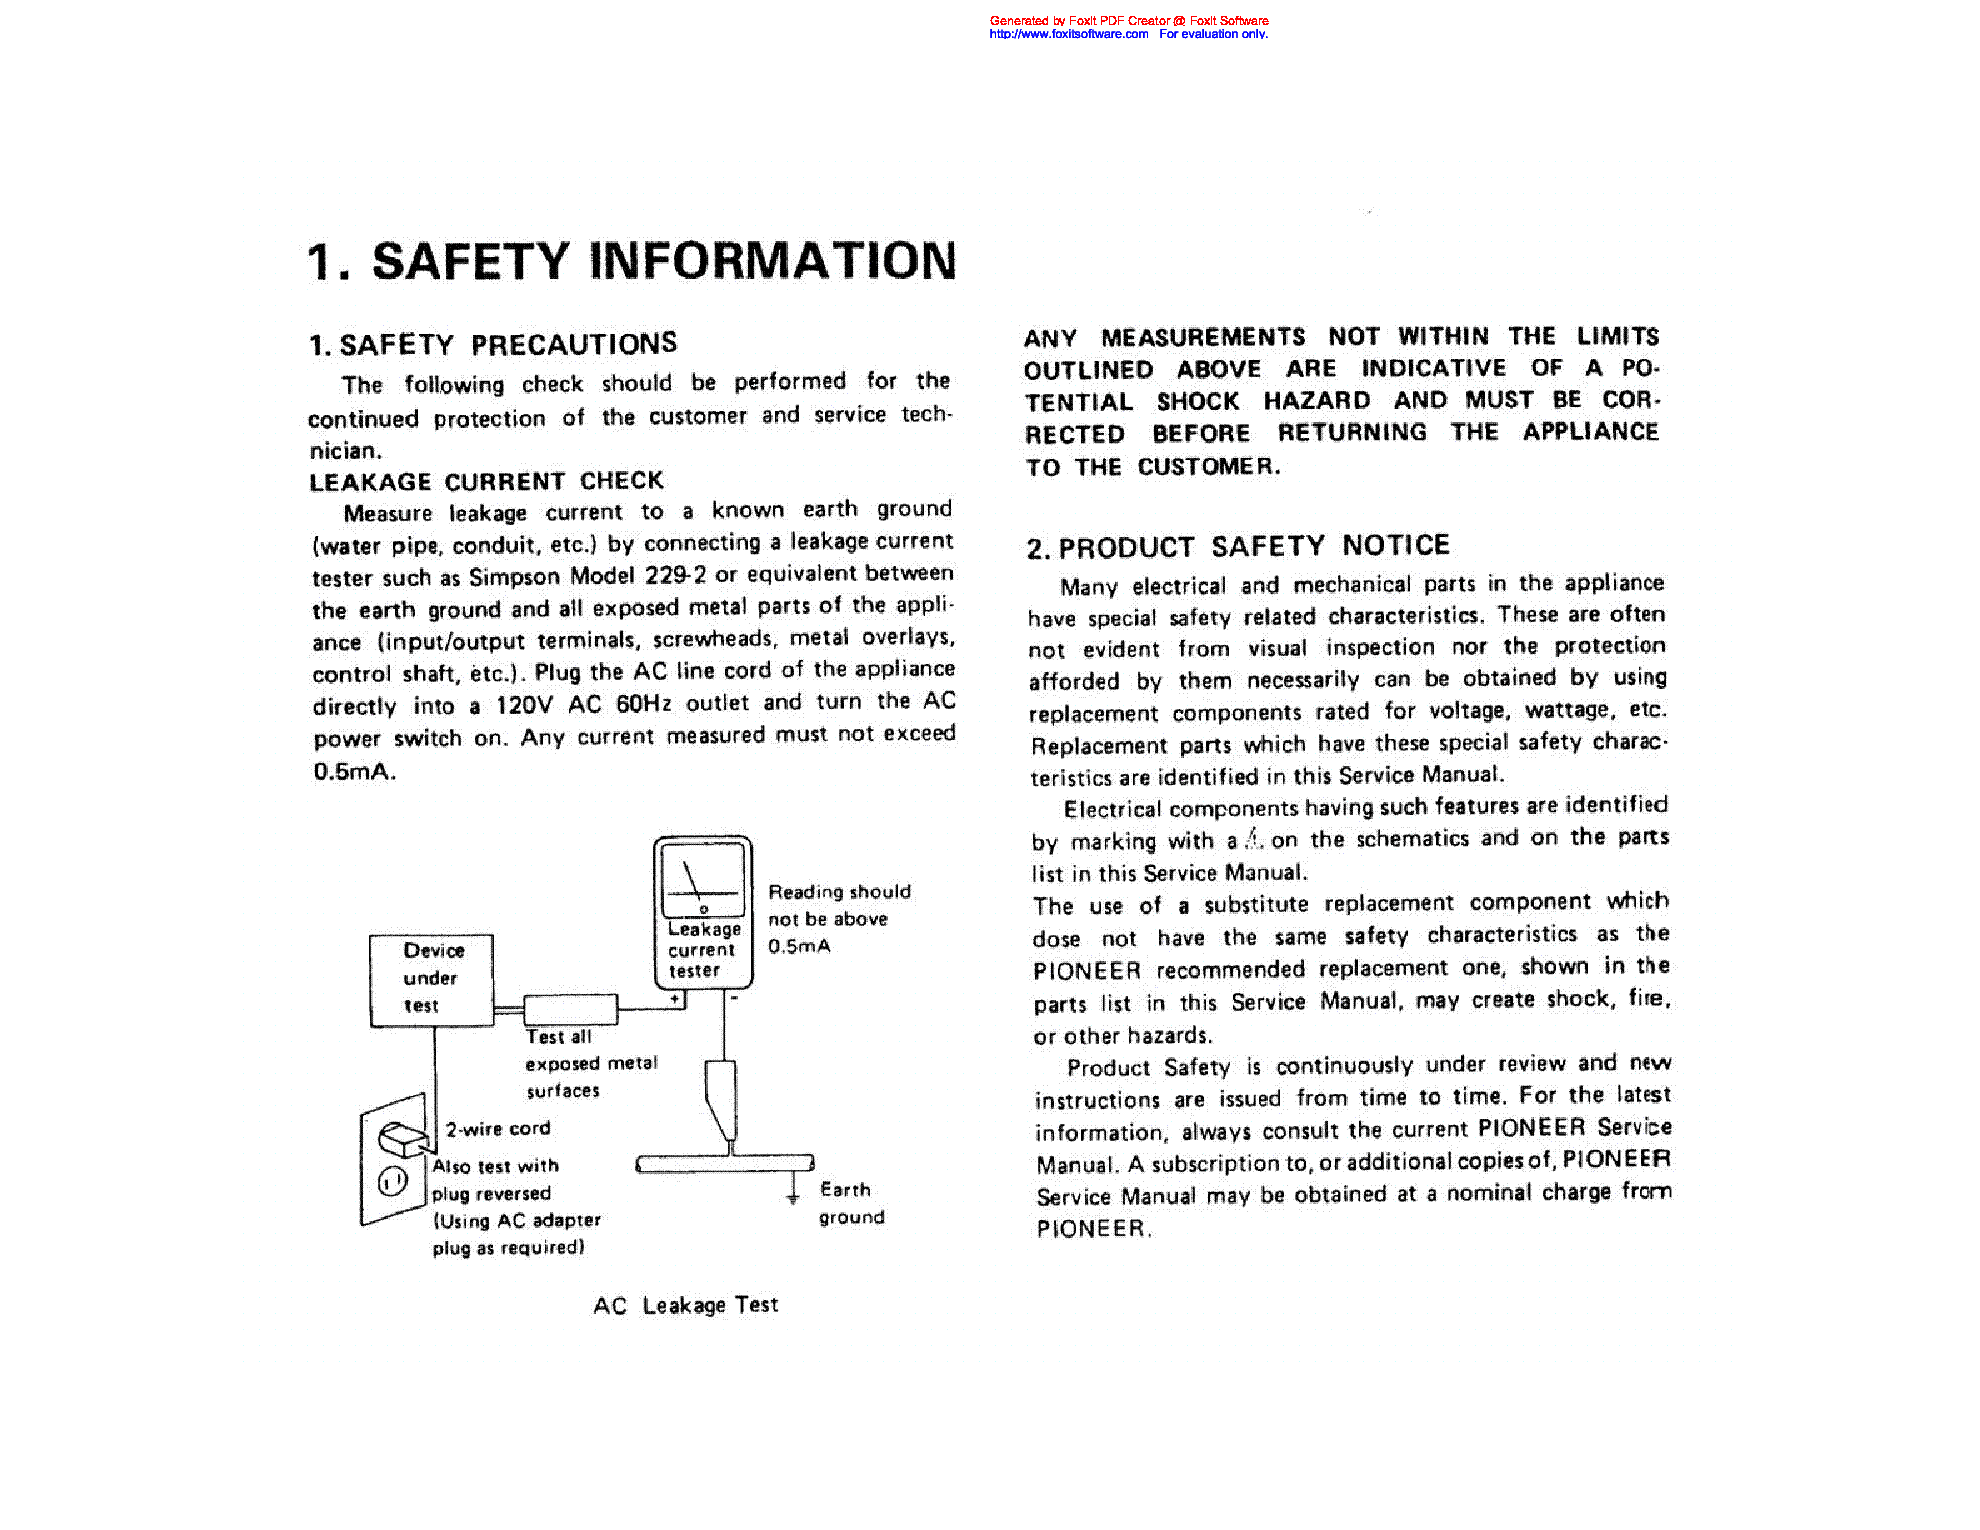 PIONEER M-90A 91 SM service manual (2nd page)